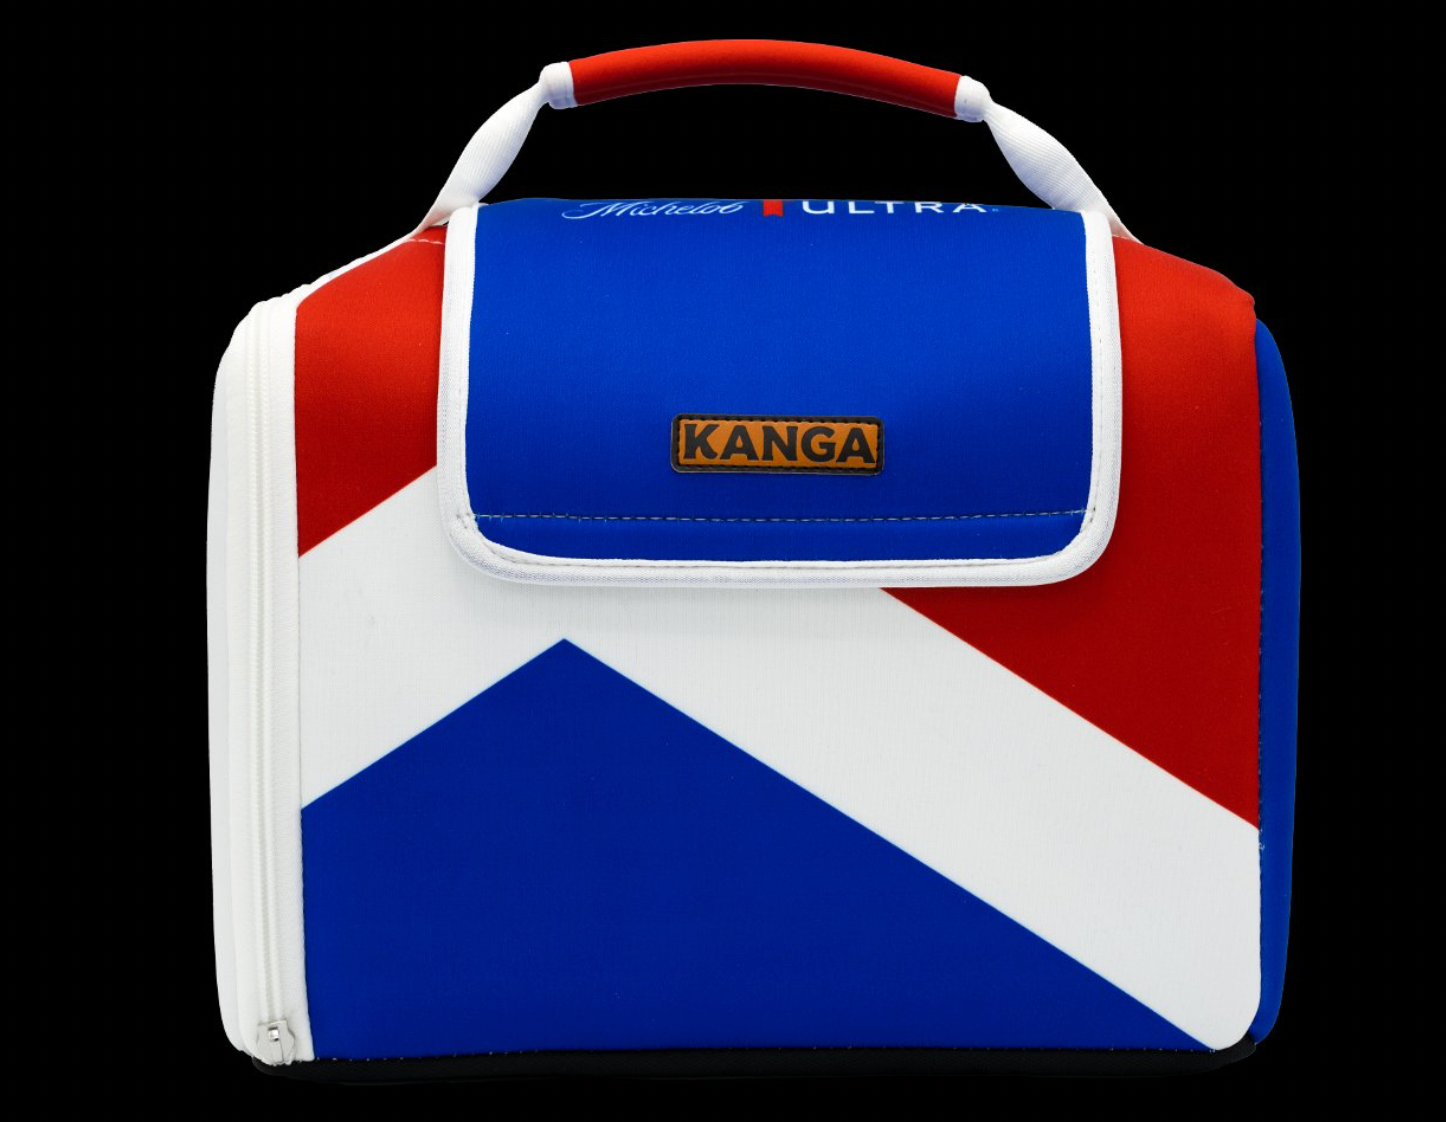 INTRODUCING THE KANGA KASE MATE  INTRODUCING THE KANGA KASE MATE! The  world's first no ice, keep the case, COOLER! Keep your 6, 12, or 24 pack  cold for up to 7